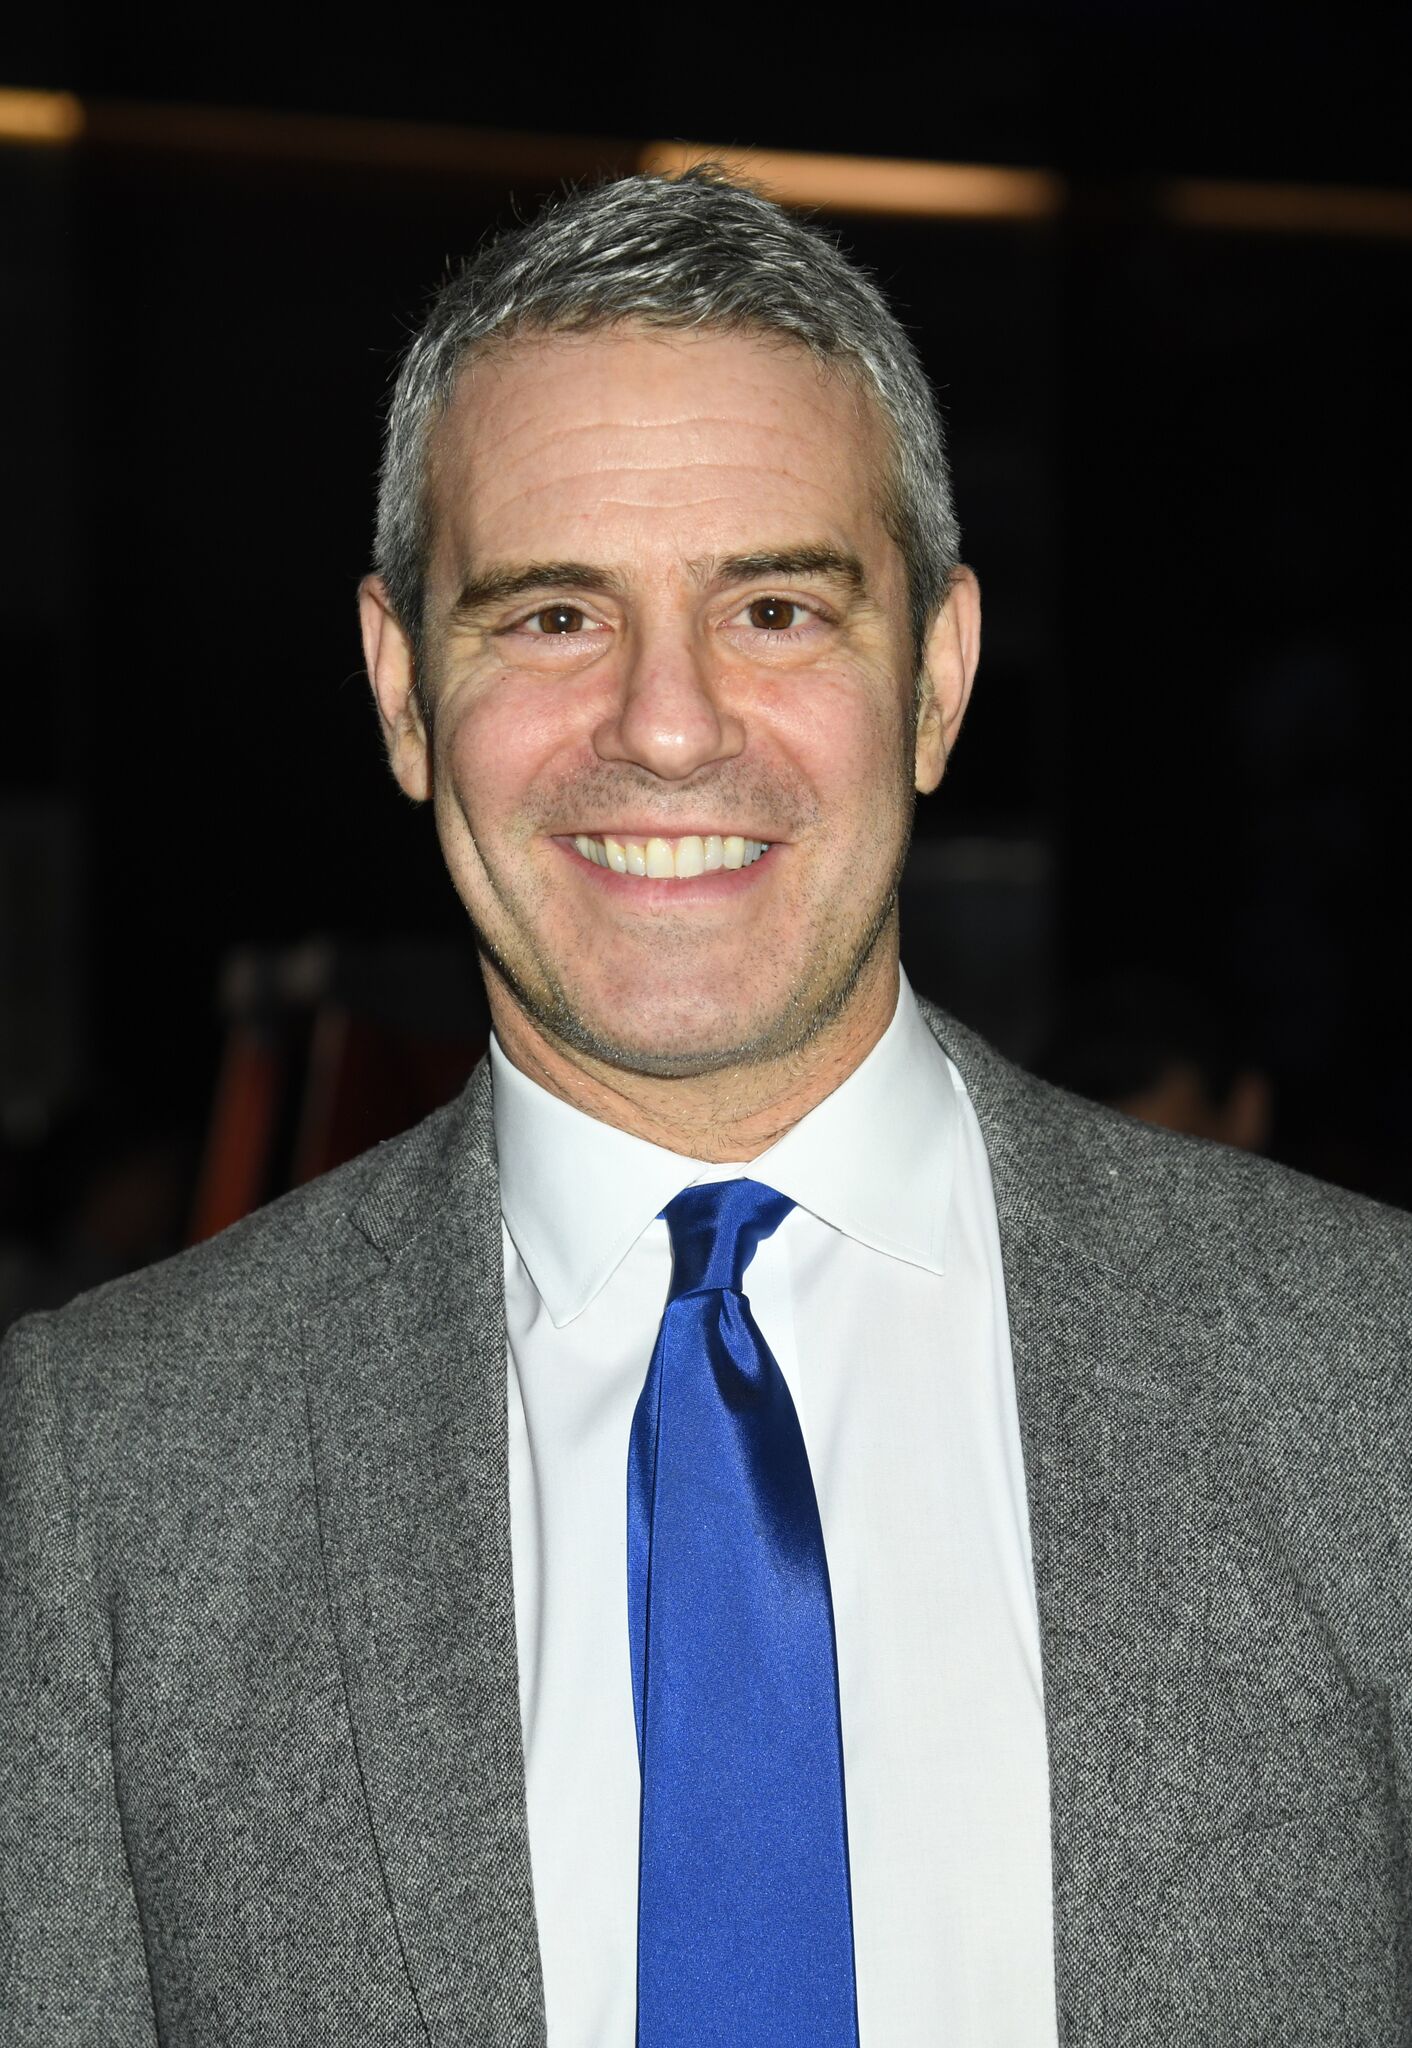  Andy Cohen attends the Watches Of Switzerland Hudson Yards opening on March 14, 2019  | Getty Images